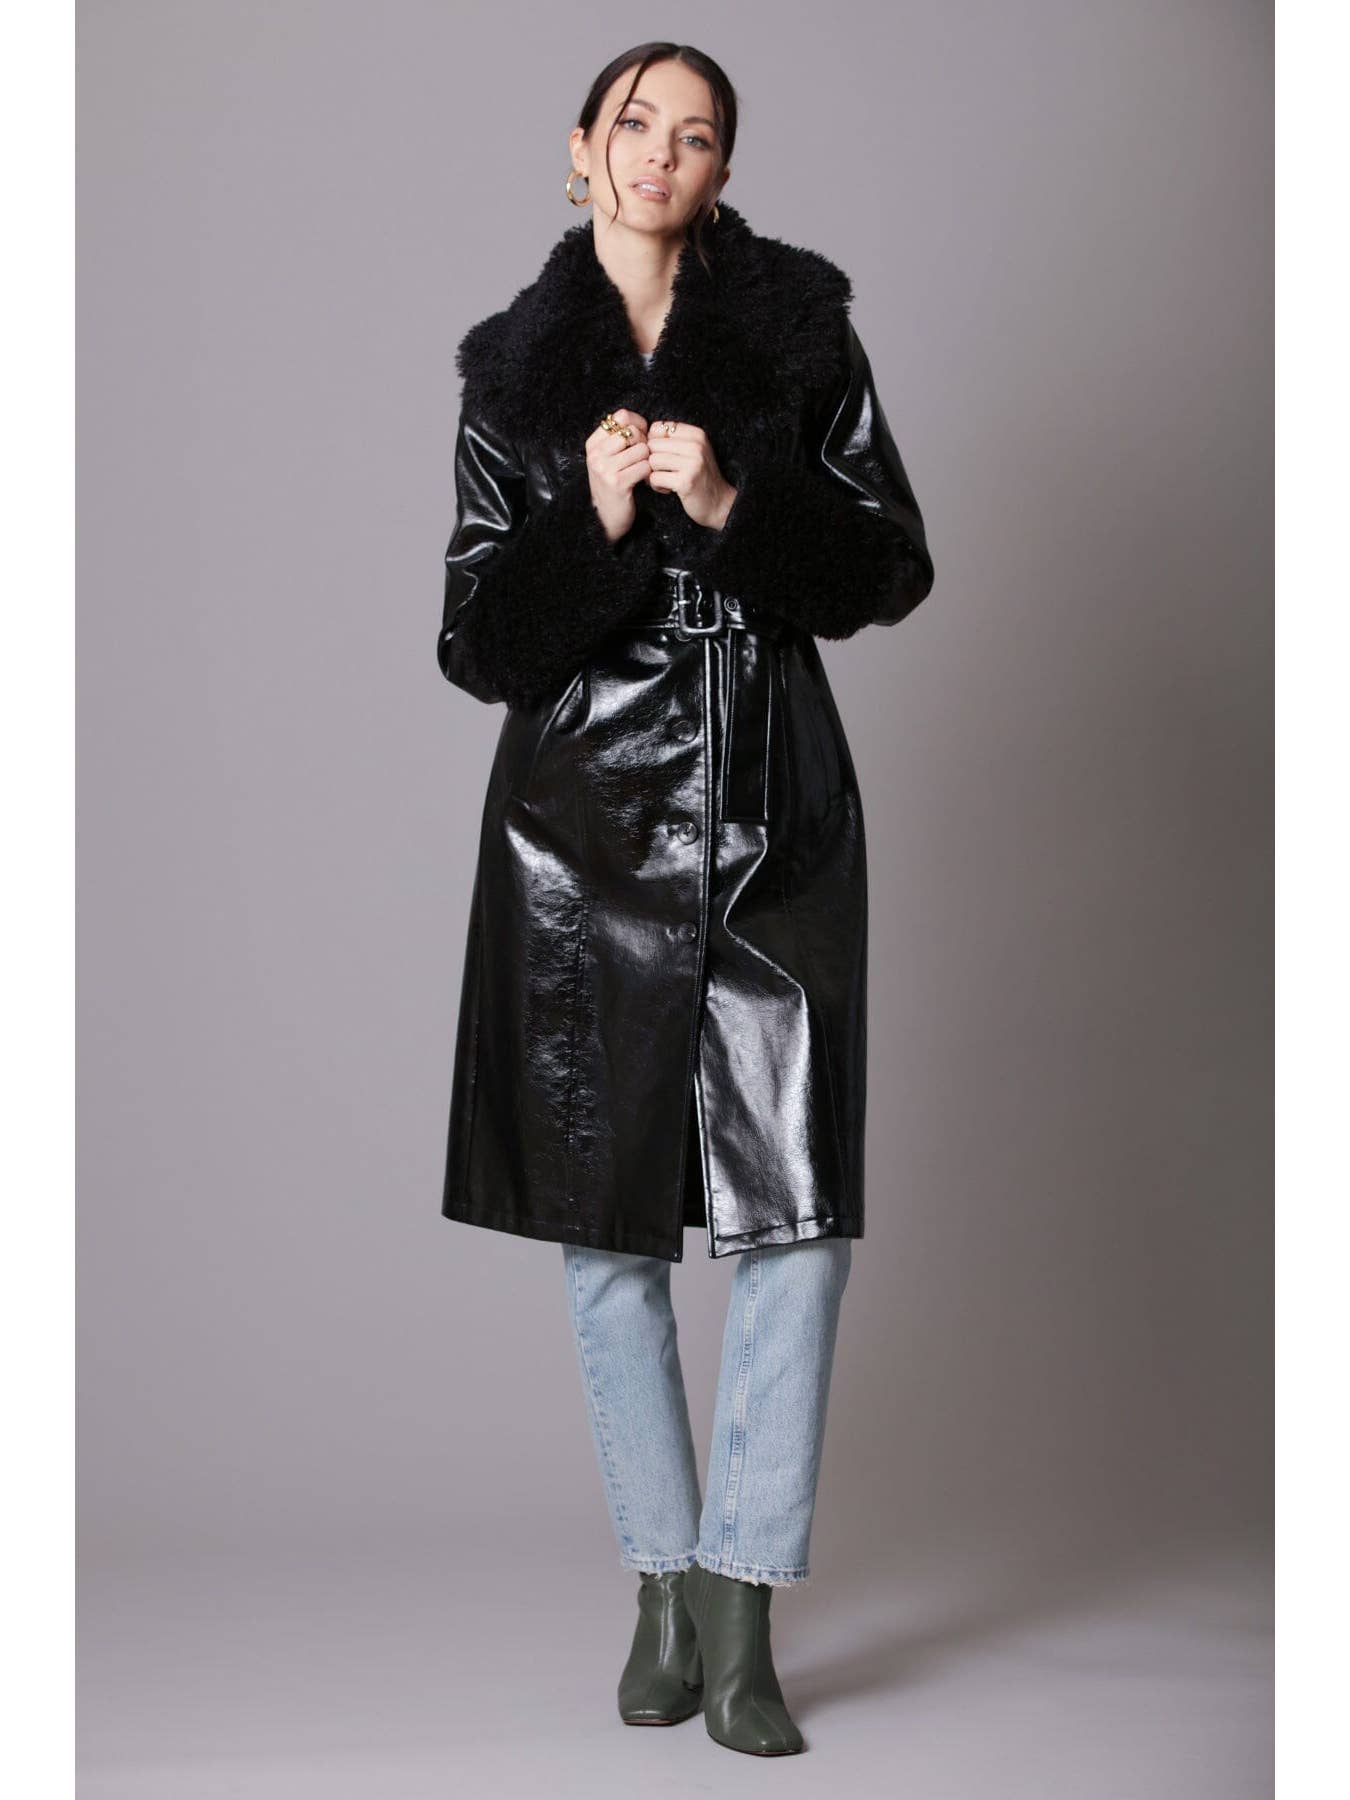 Outerwear – Shop at the Mix